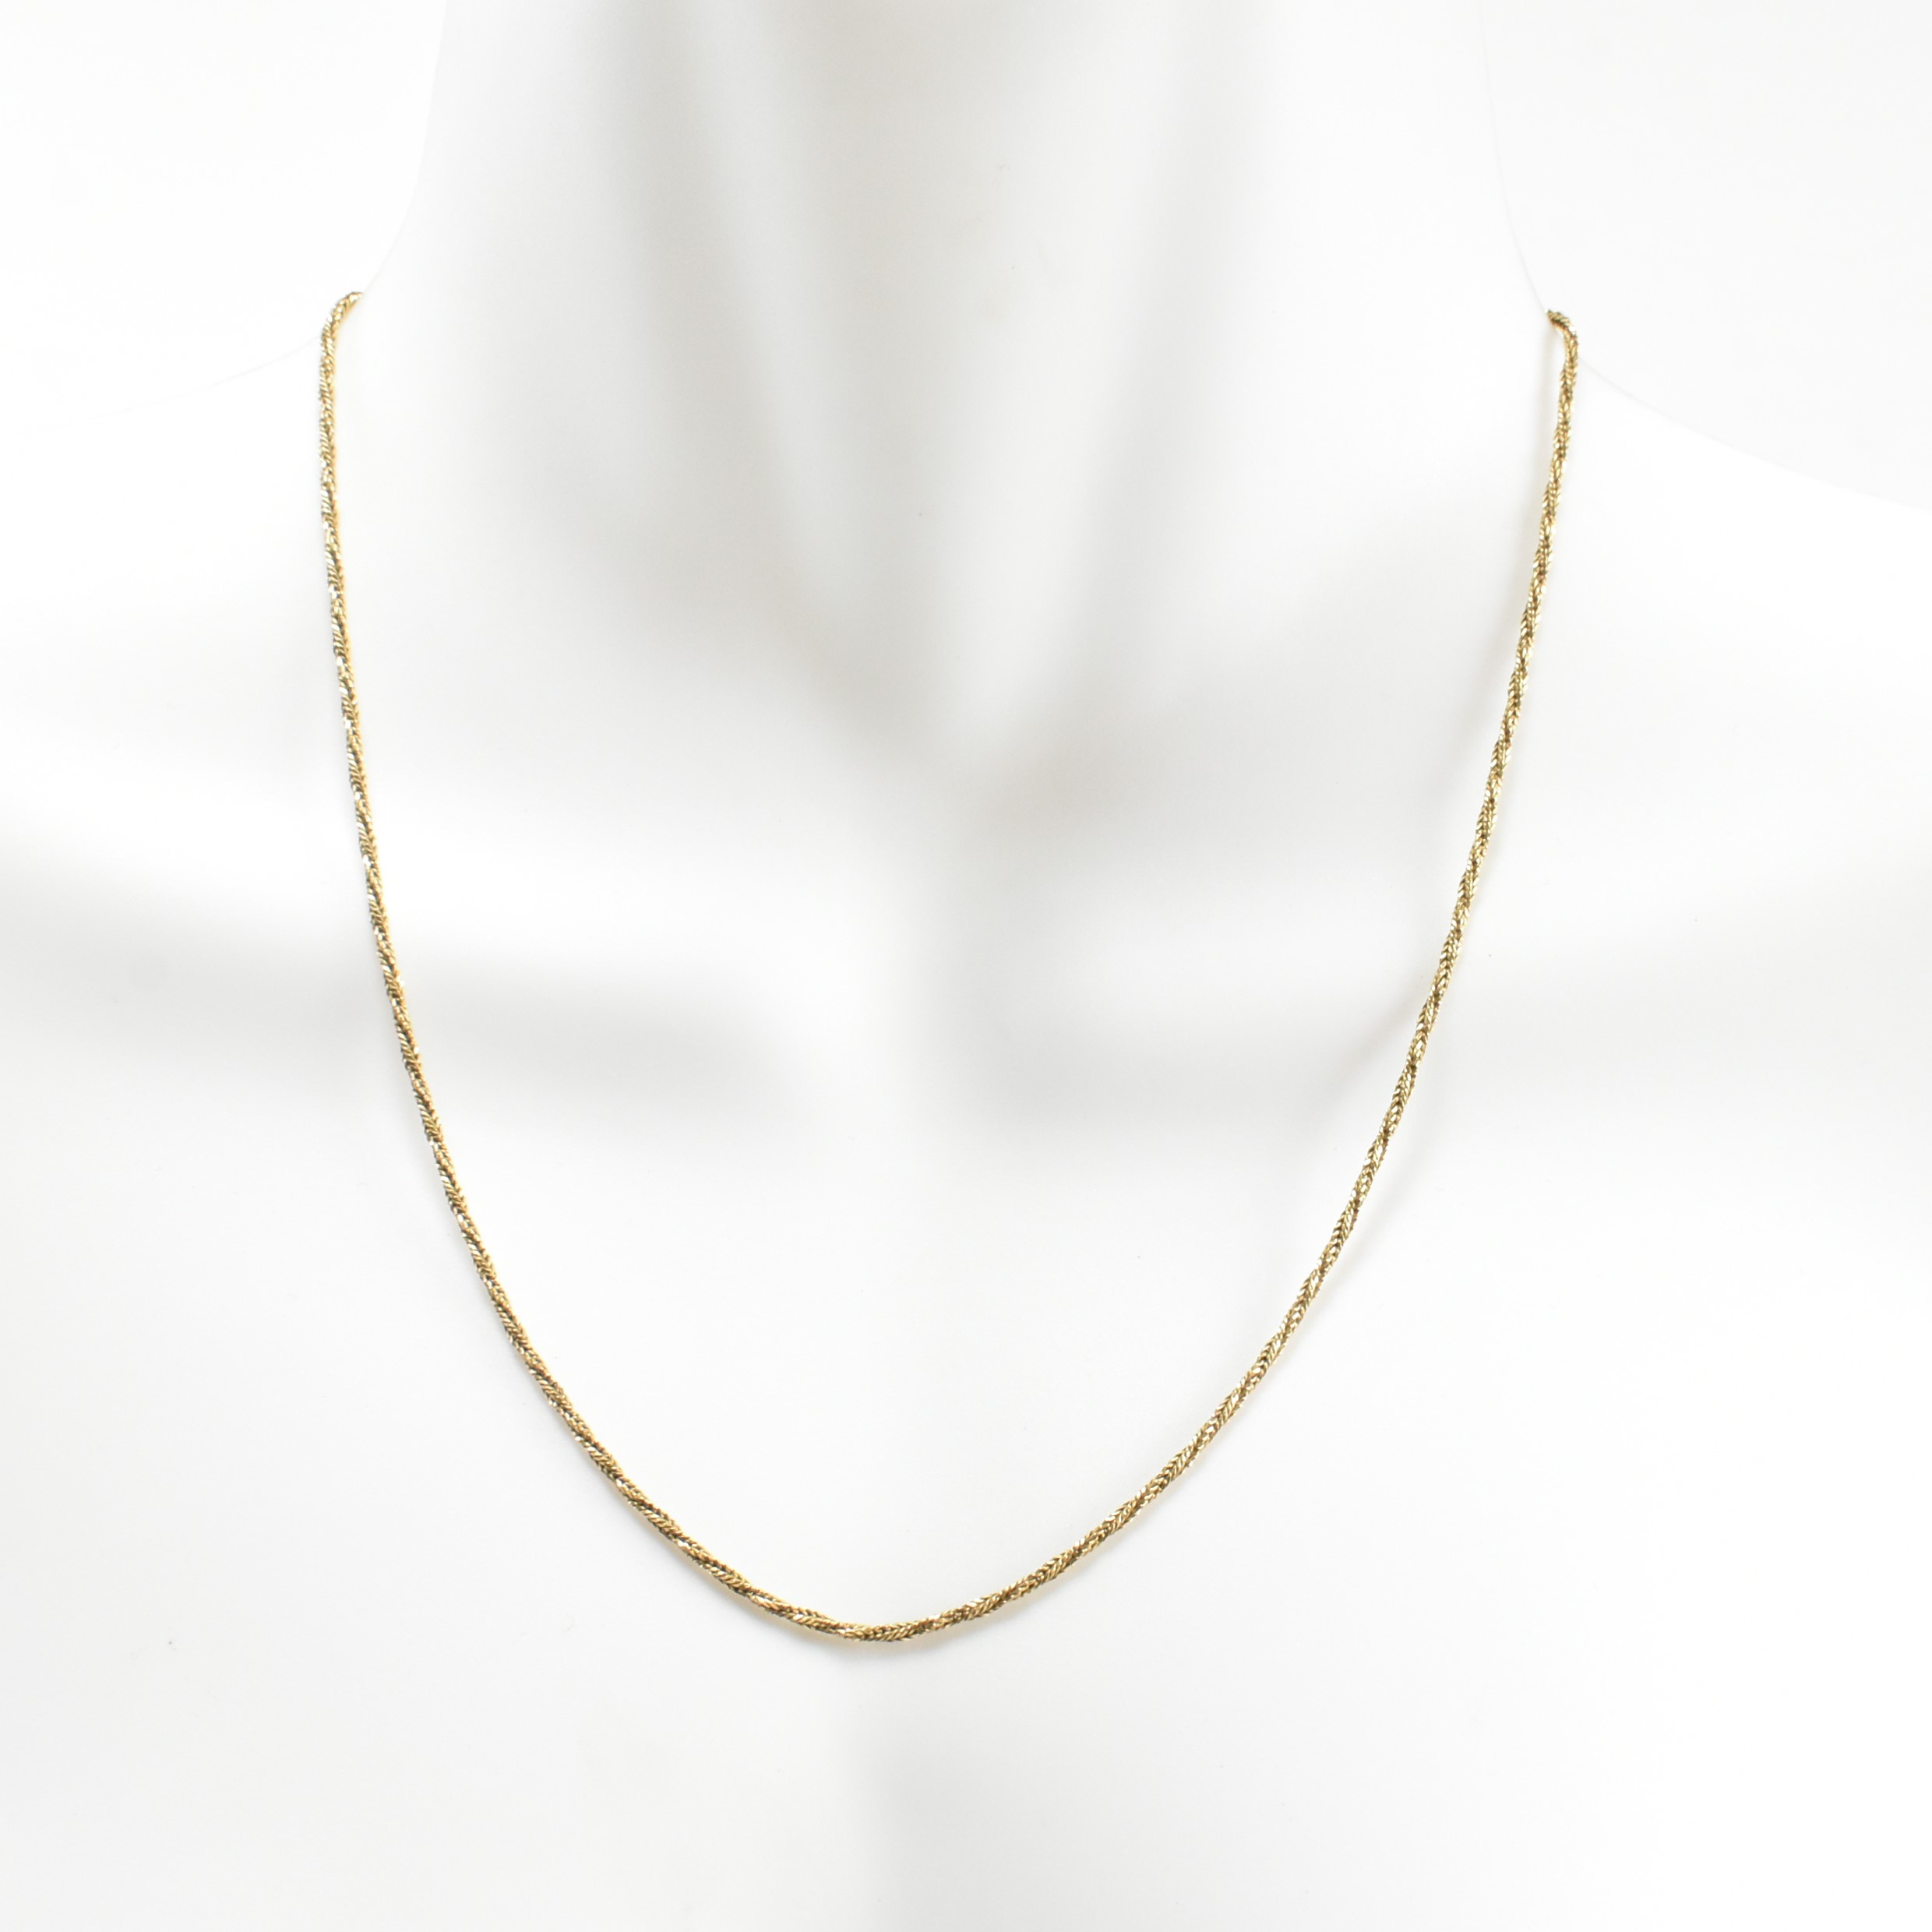 18CT GOLD TWISTED CHAIN NECKLACE - Image 2 of 4